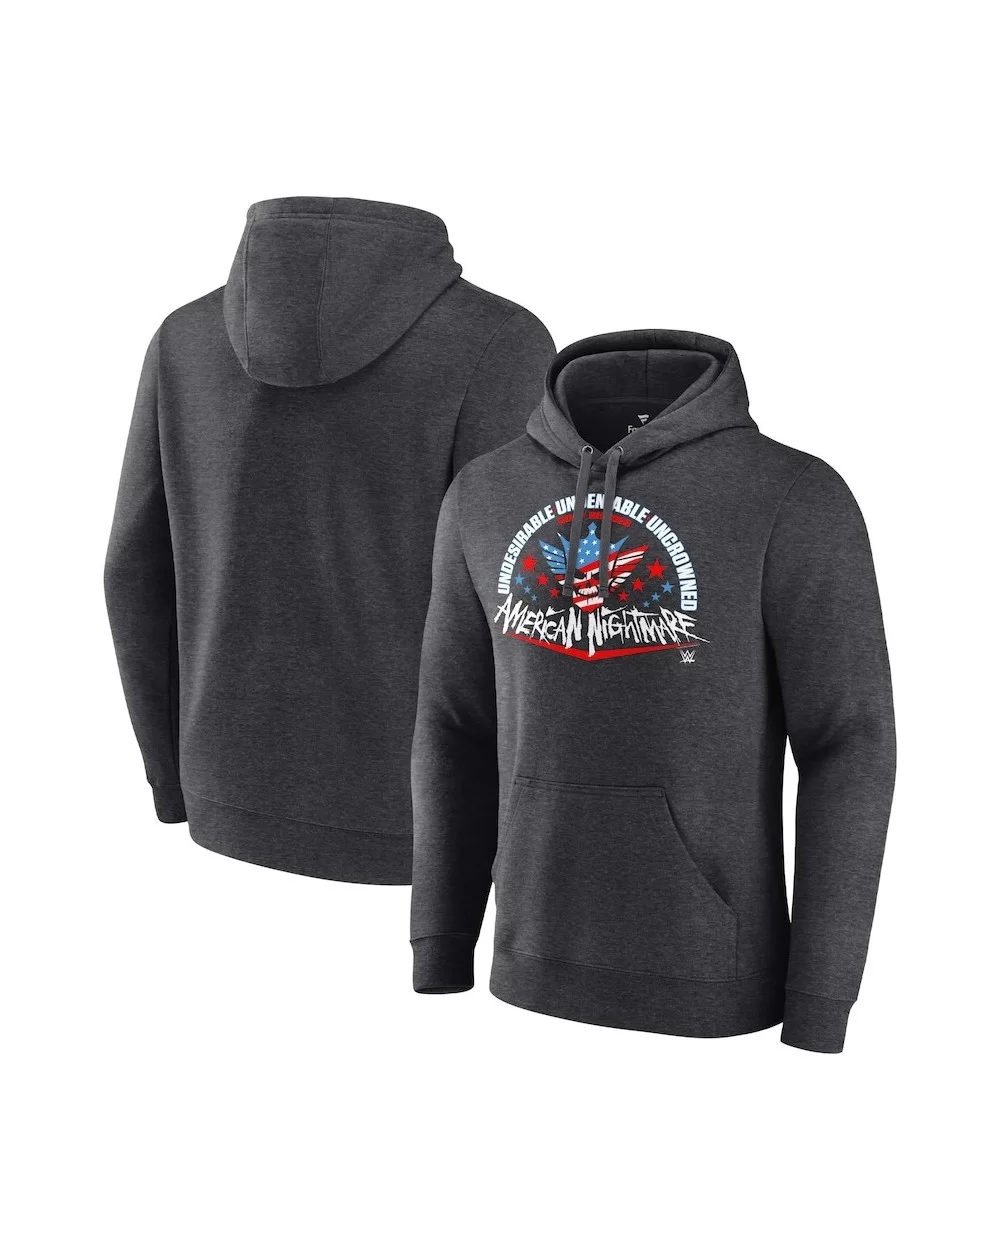 Men's Fanatics Branded Charcoal Cody Rhodes Undeniable Pullover Hoodie $18.00 Apparel